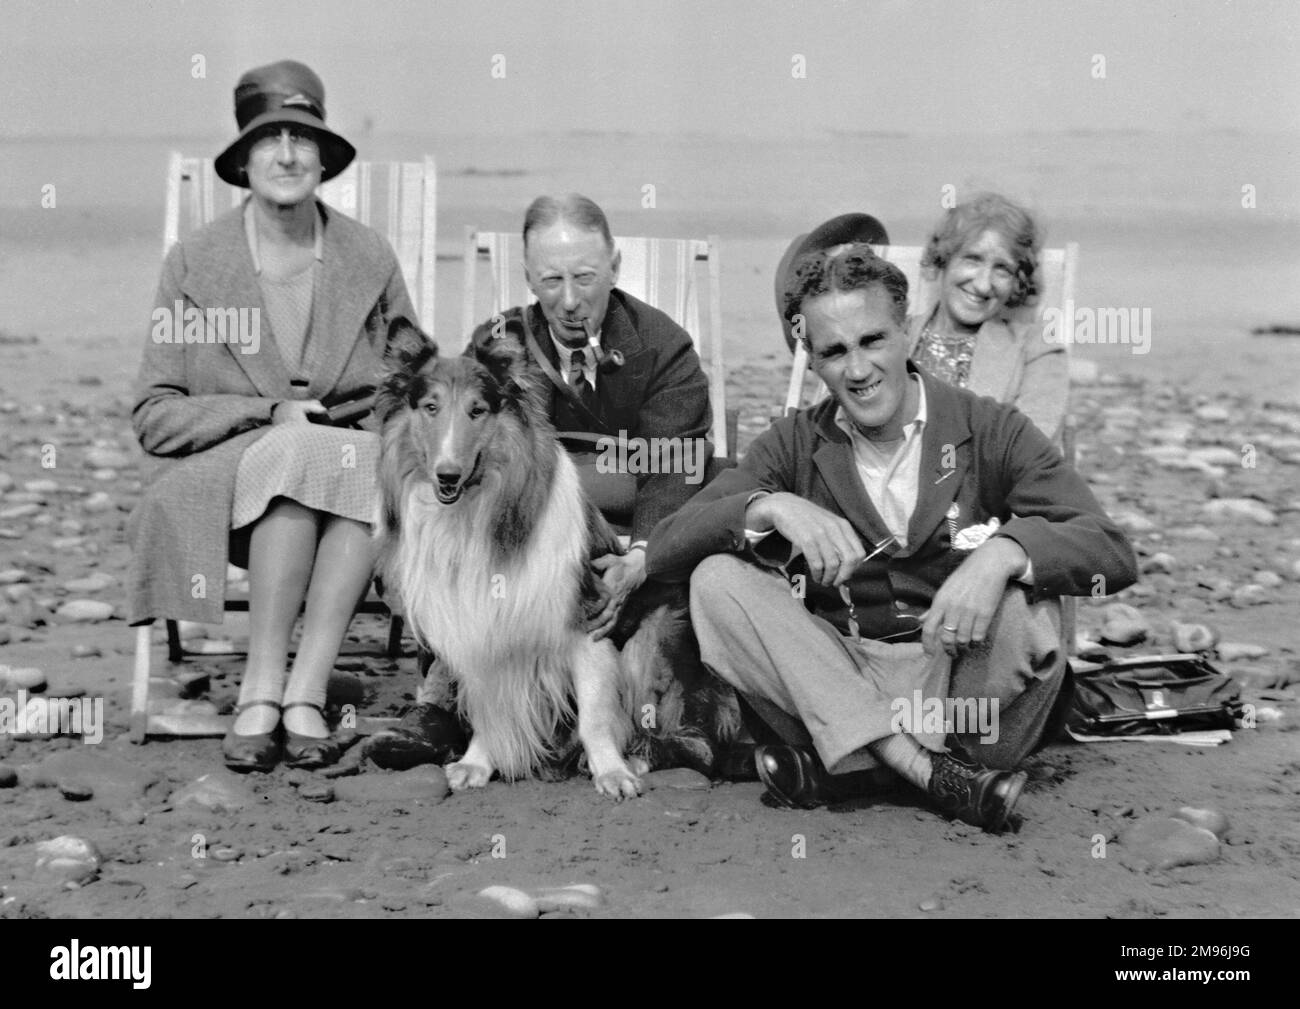 Four people (two men and two women) sitting in deckchairs on a beach with a collie dog. Stock Photo